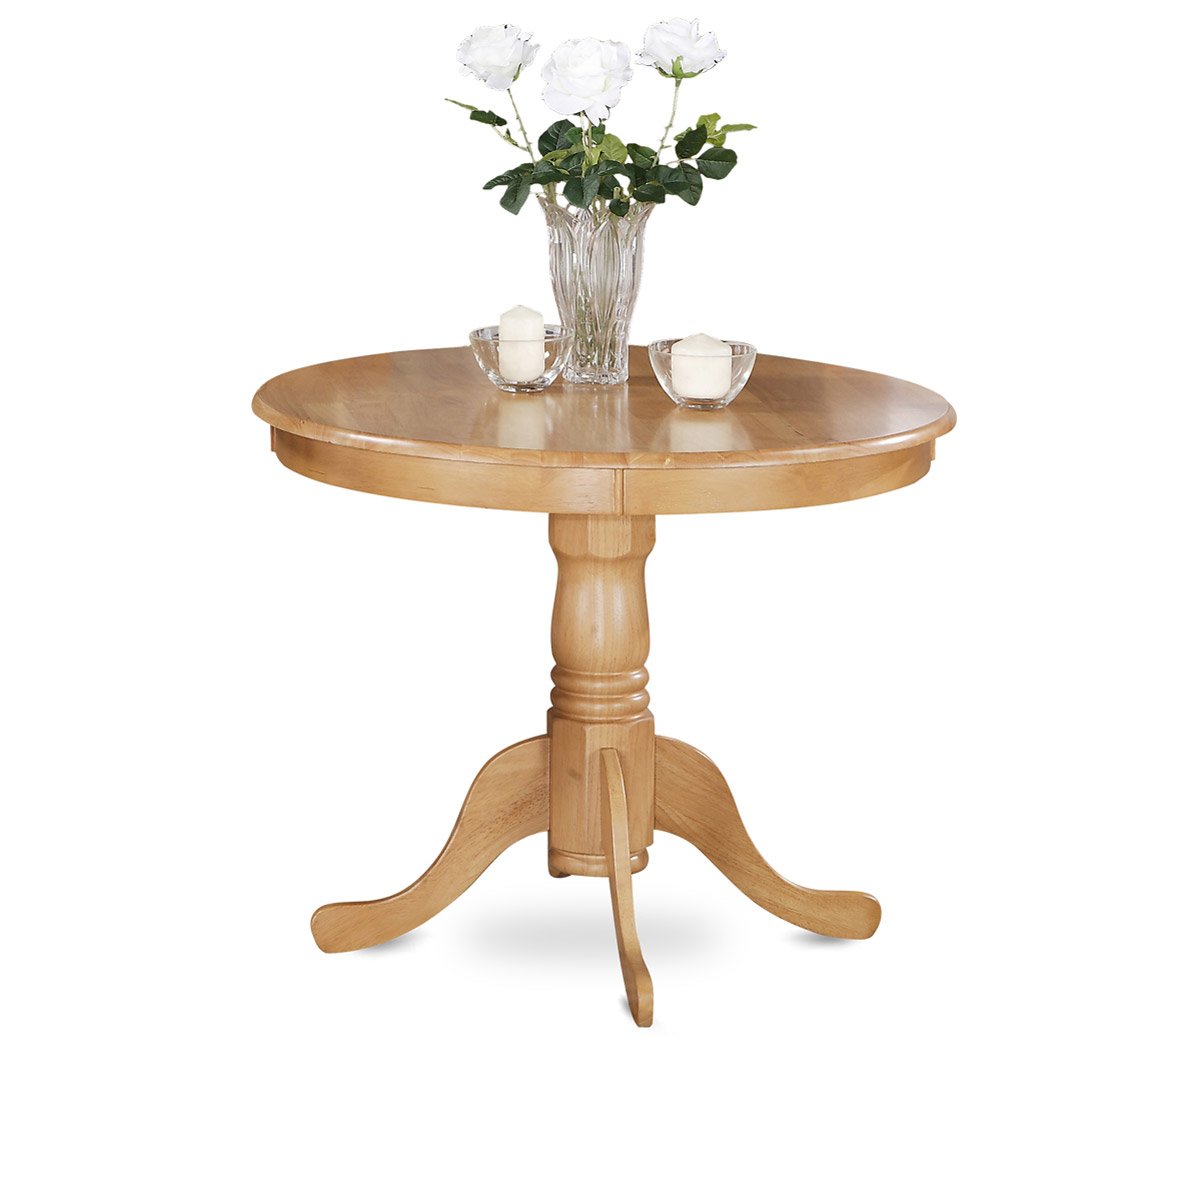 5 Piece Dining Set Includes a Round Dining Room Table with Pedestal and 4 Wood Seat Chairs